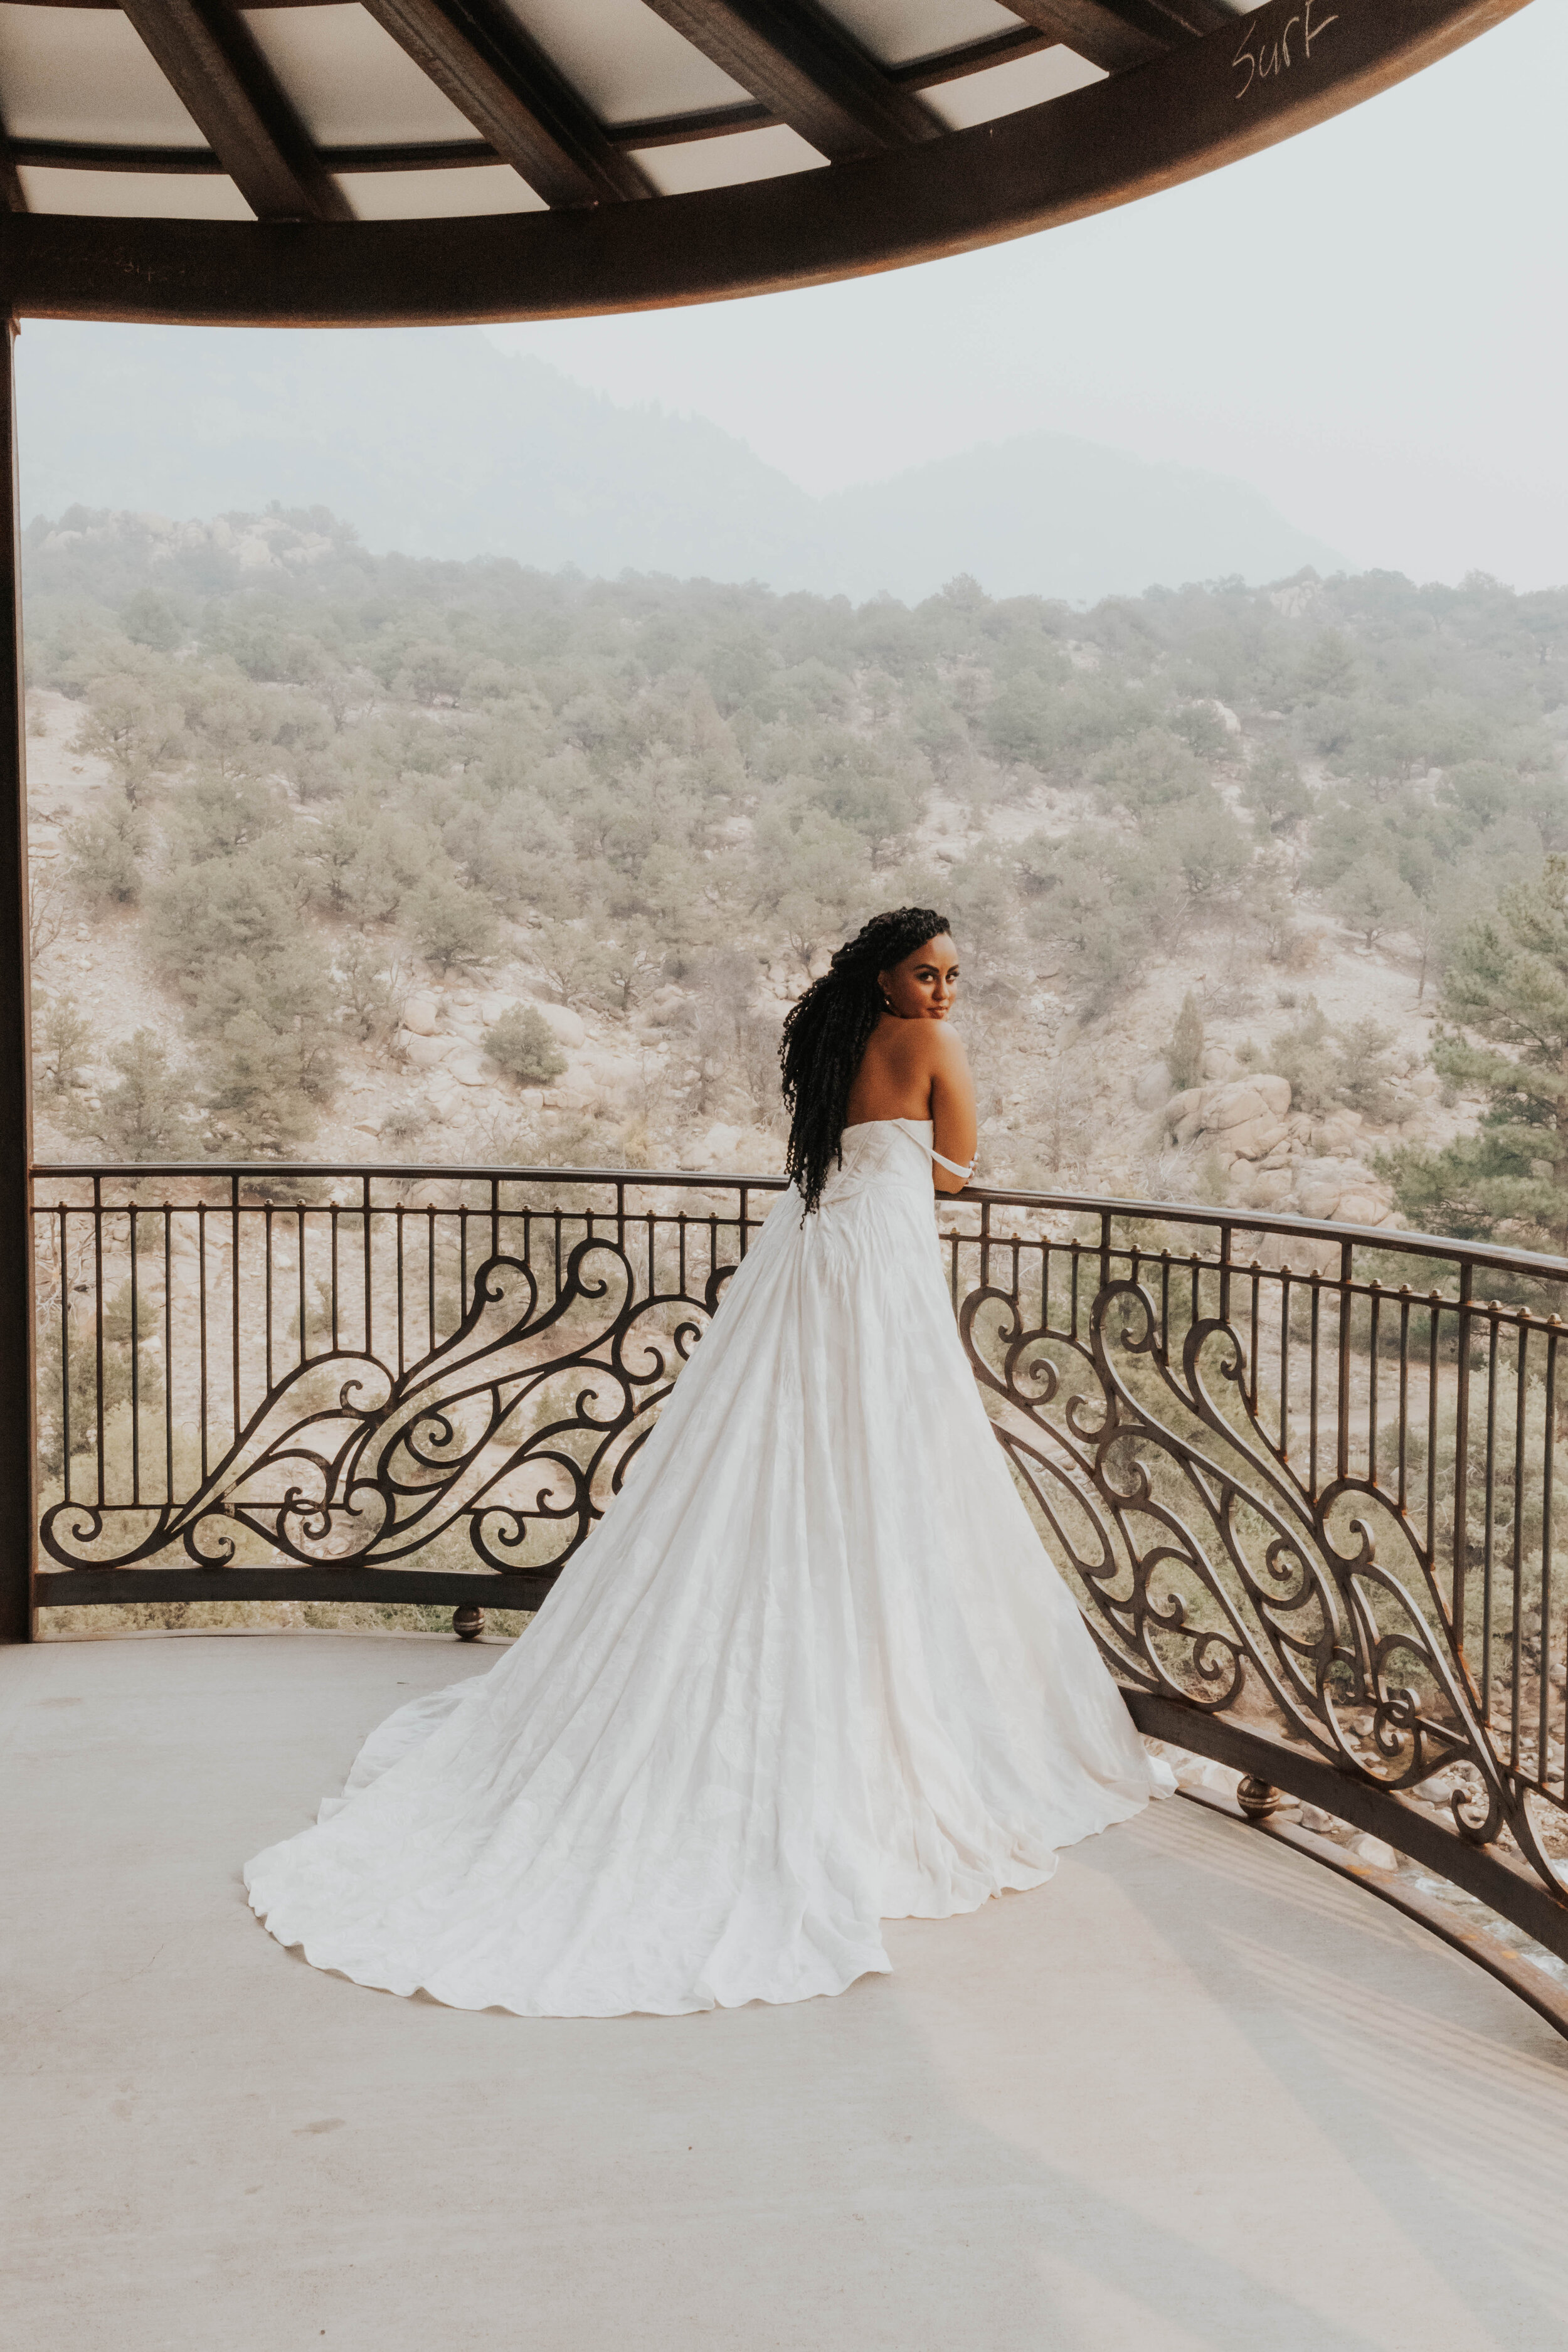  Bridal Rebel styled shoot at the Surf Hotel in Buena Vista, Colorado in Rue de Seine wedding dresses from a&amp;be denver bridal shop 